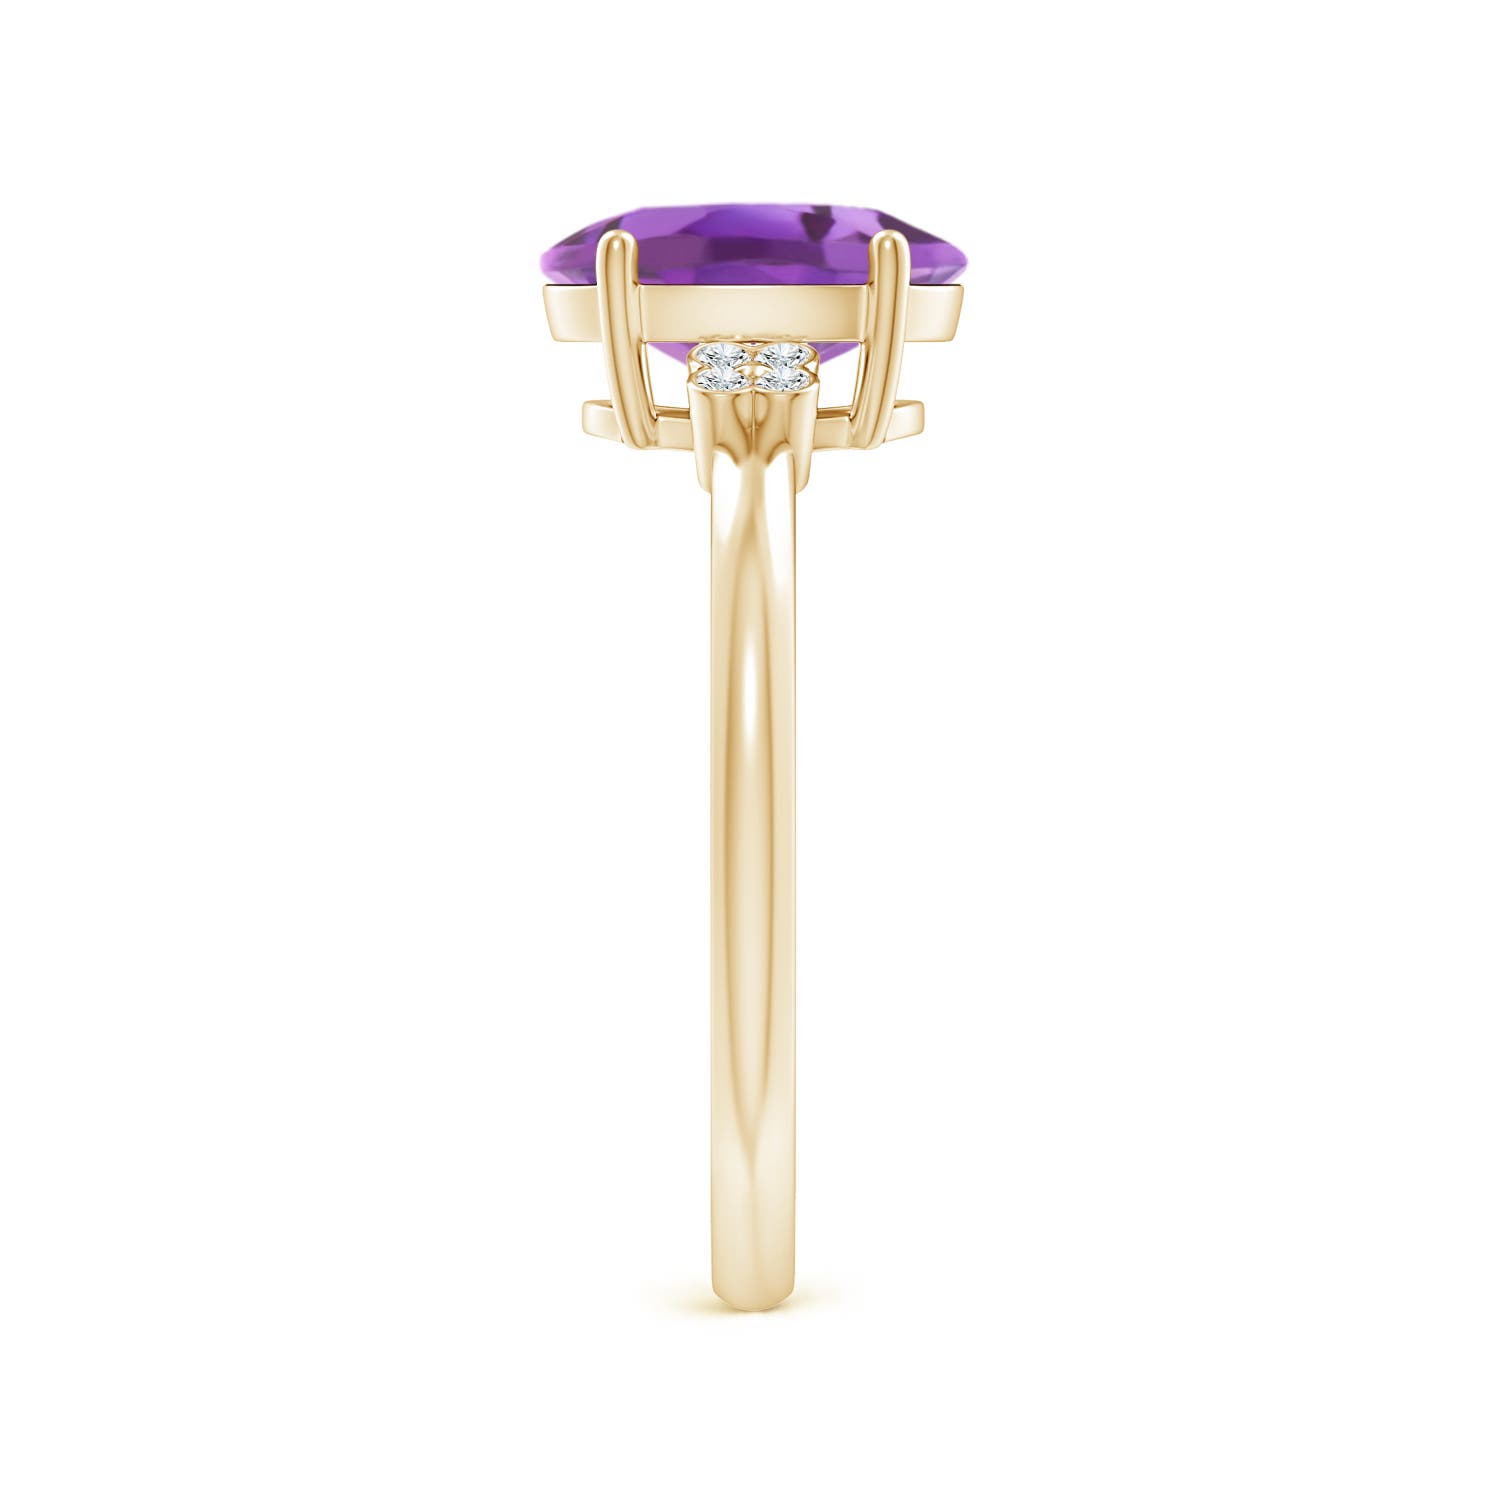 A- Amethyst / 1.66 CT / 14 KT Yellow Gold